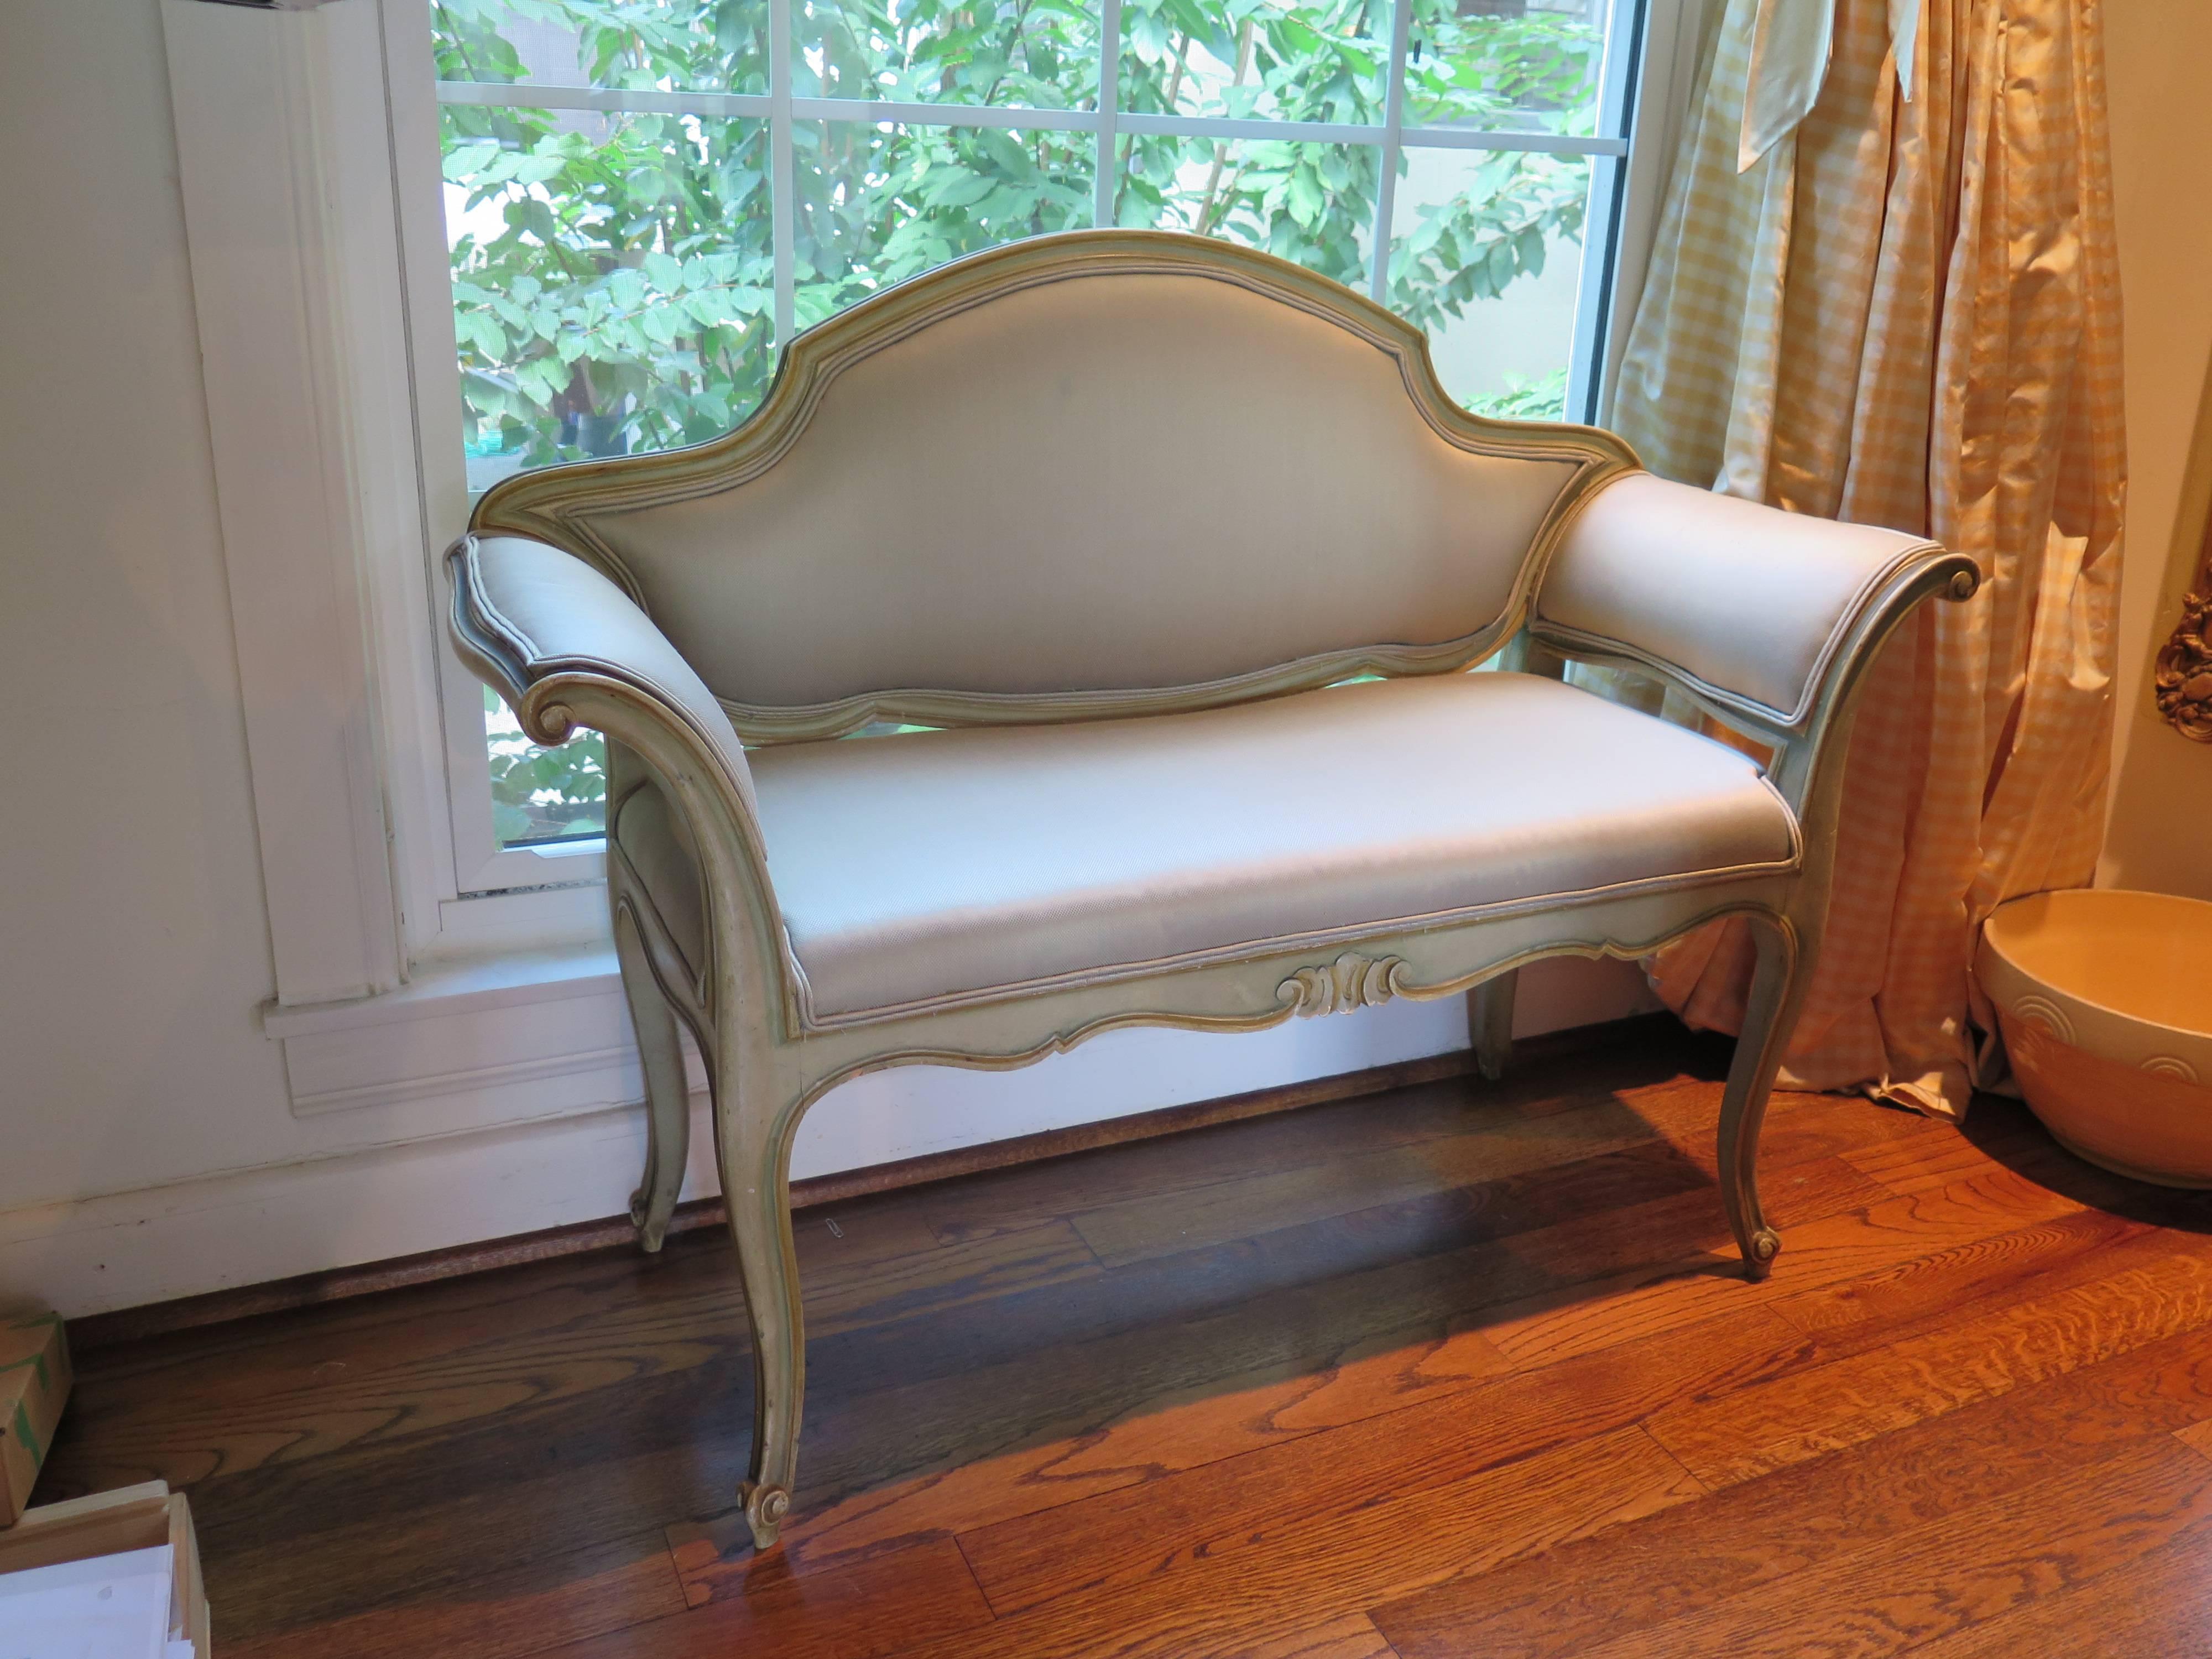 19th century petite settee upholstered in beautiful pale sage silk.